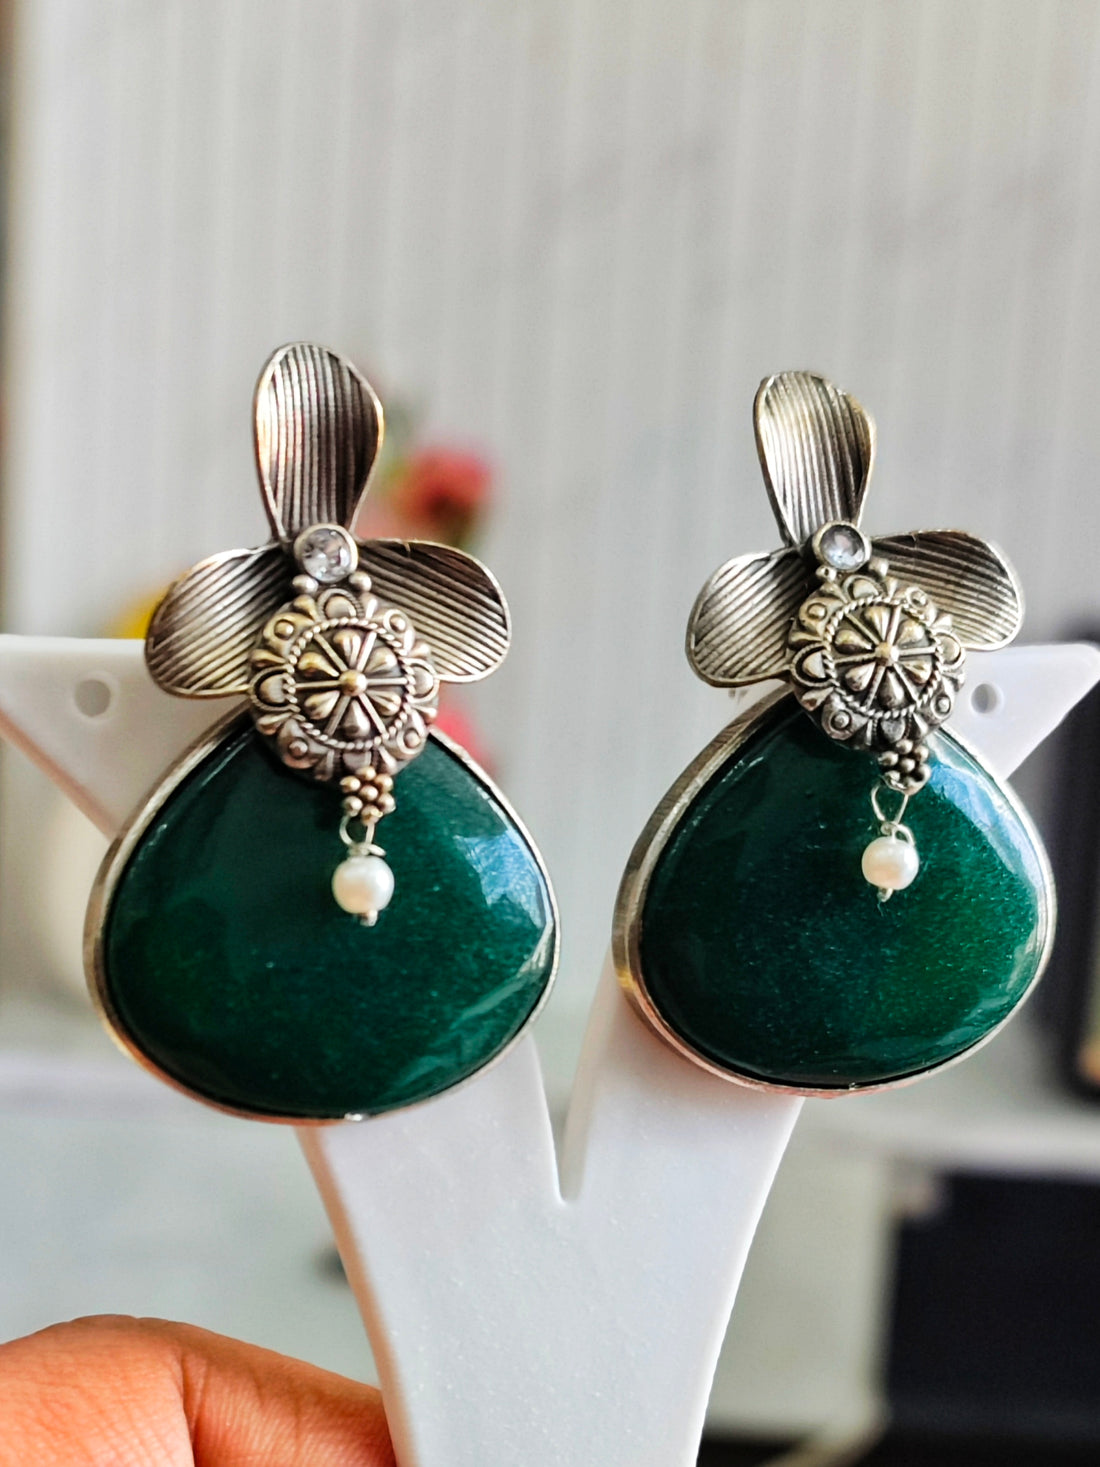 Urj Big Stone Premium Dangler Earrings from the House of Mrigaya by Nandini for Party Look | Festive Occasions & Traditional Look- - Mrigaya India